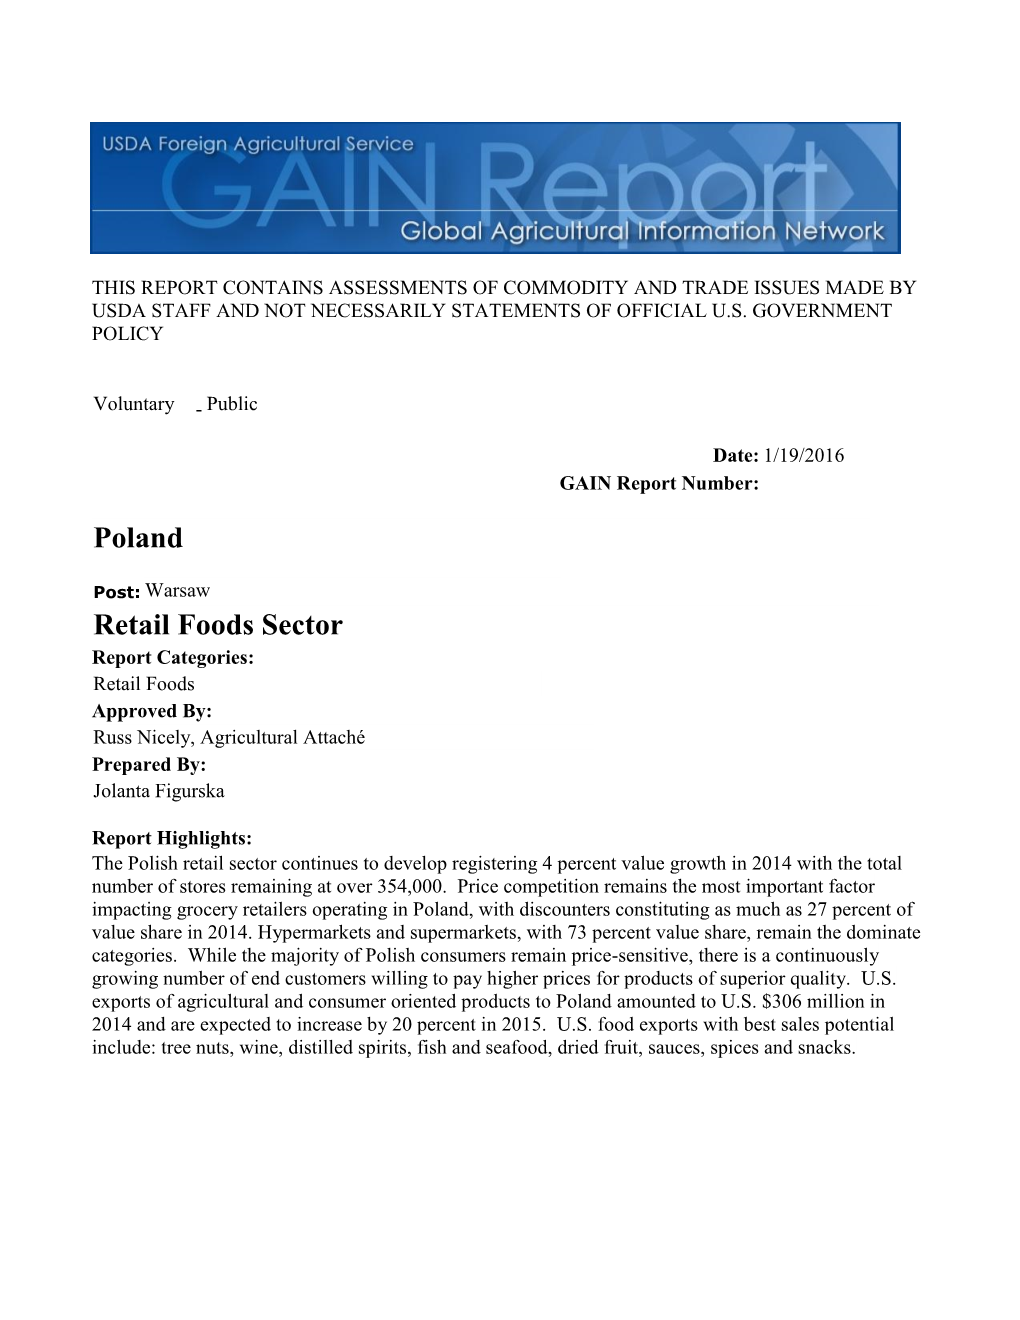 Retail Foods Sector Poland